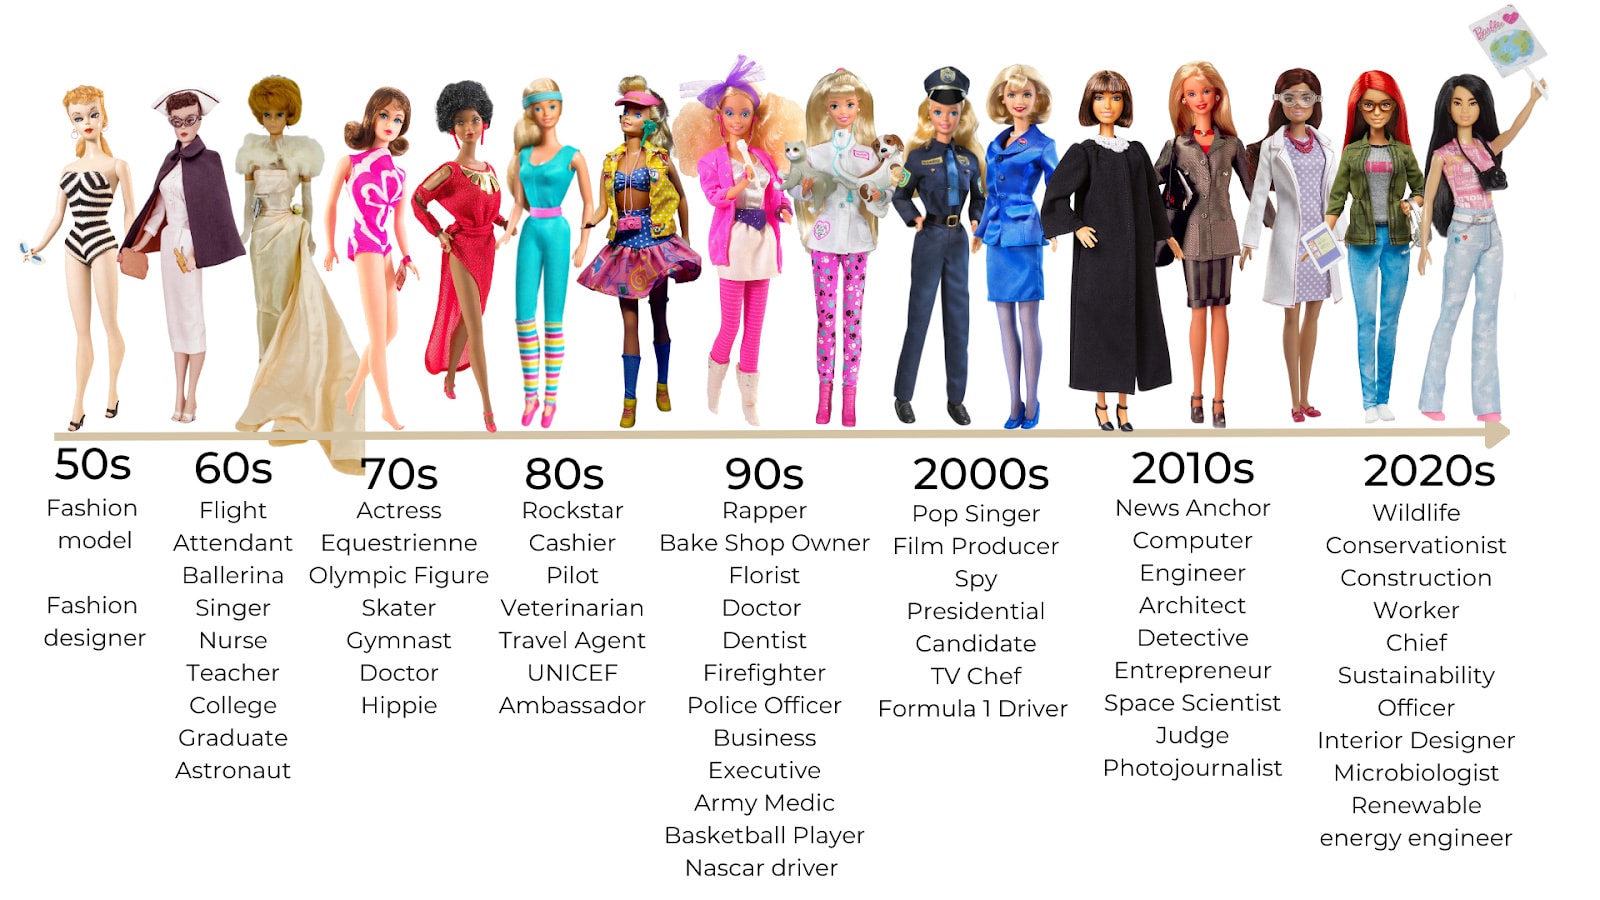 Barbie timeline from 1950-2020